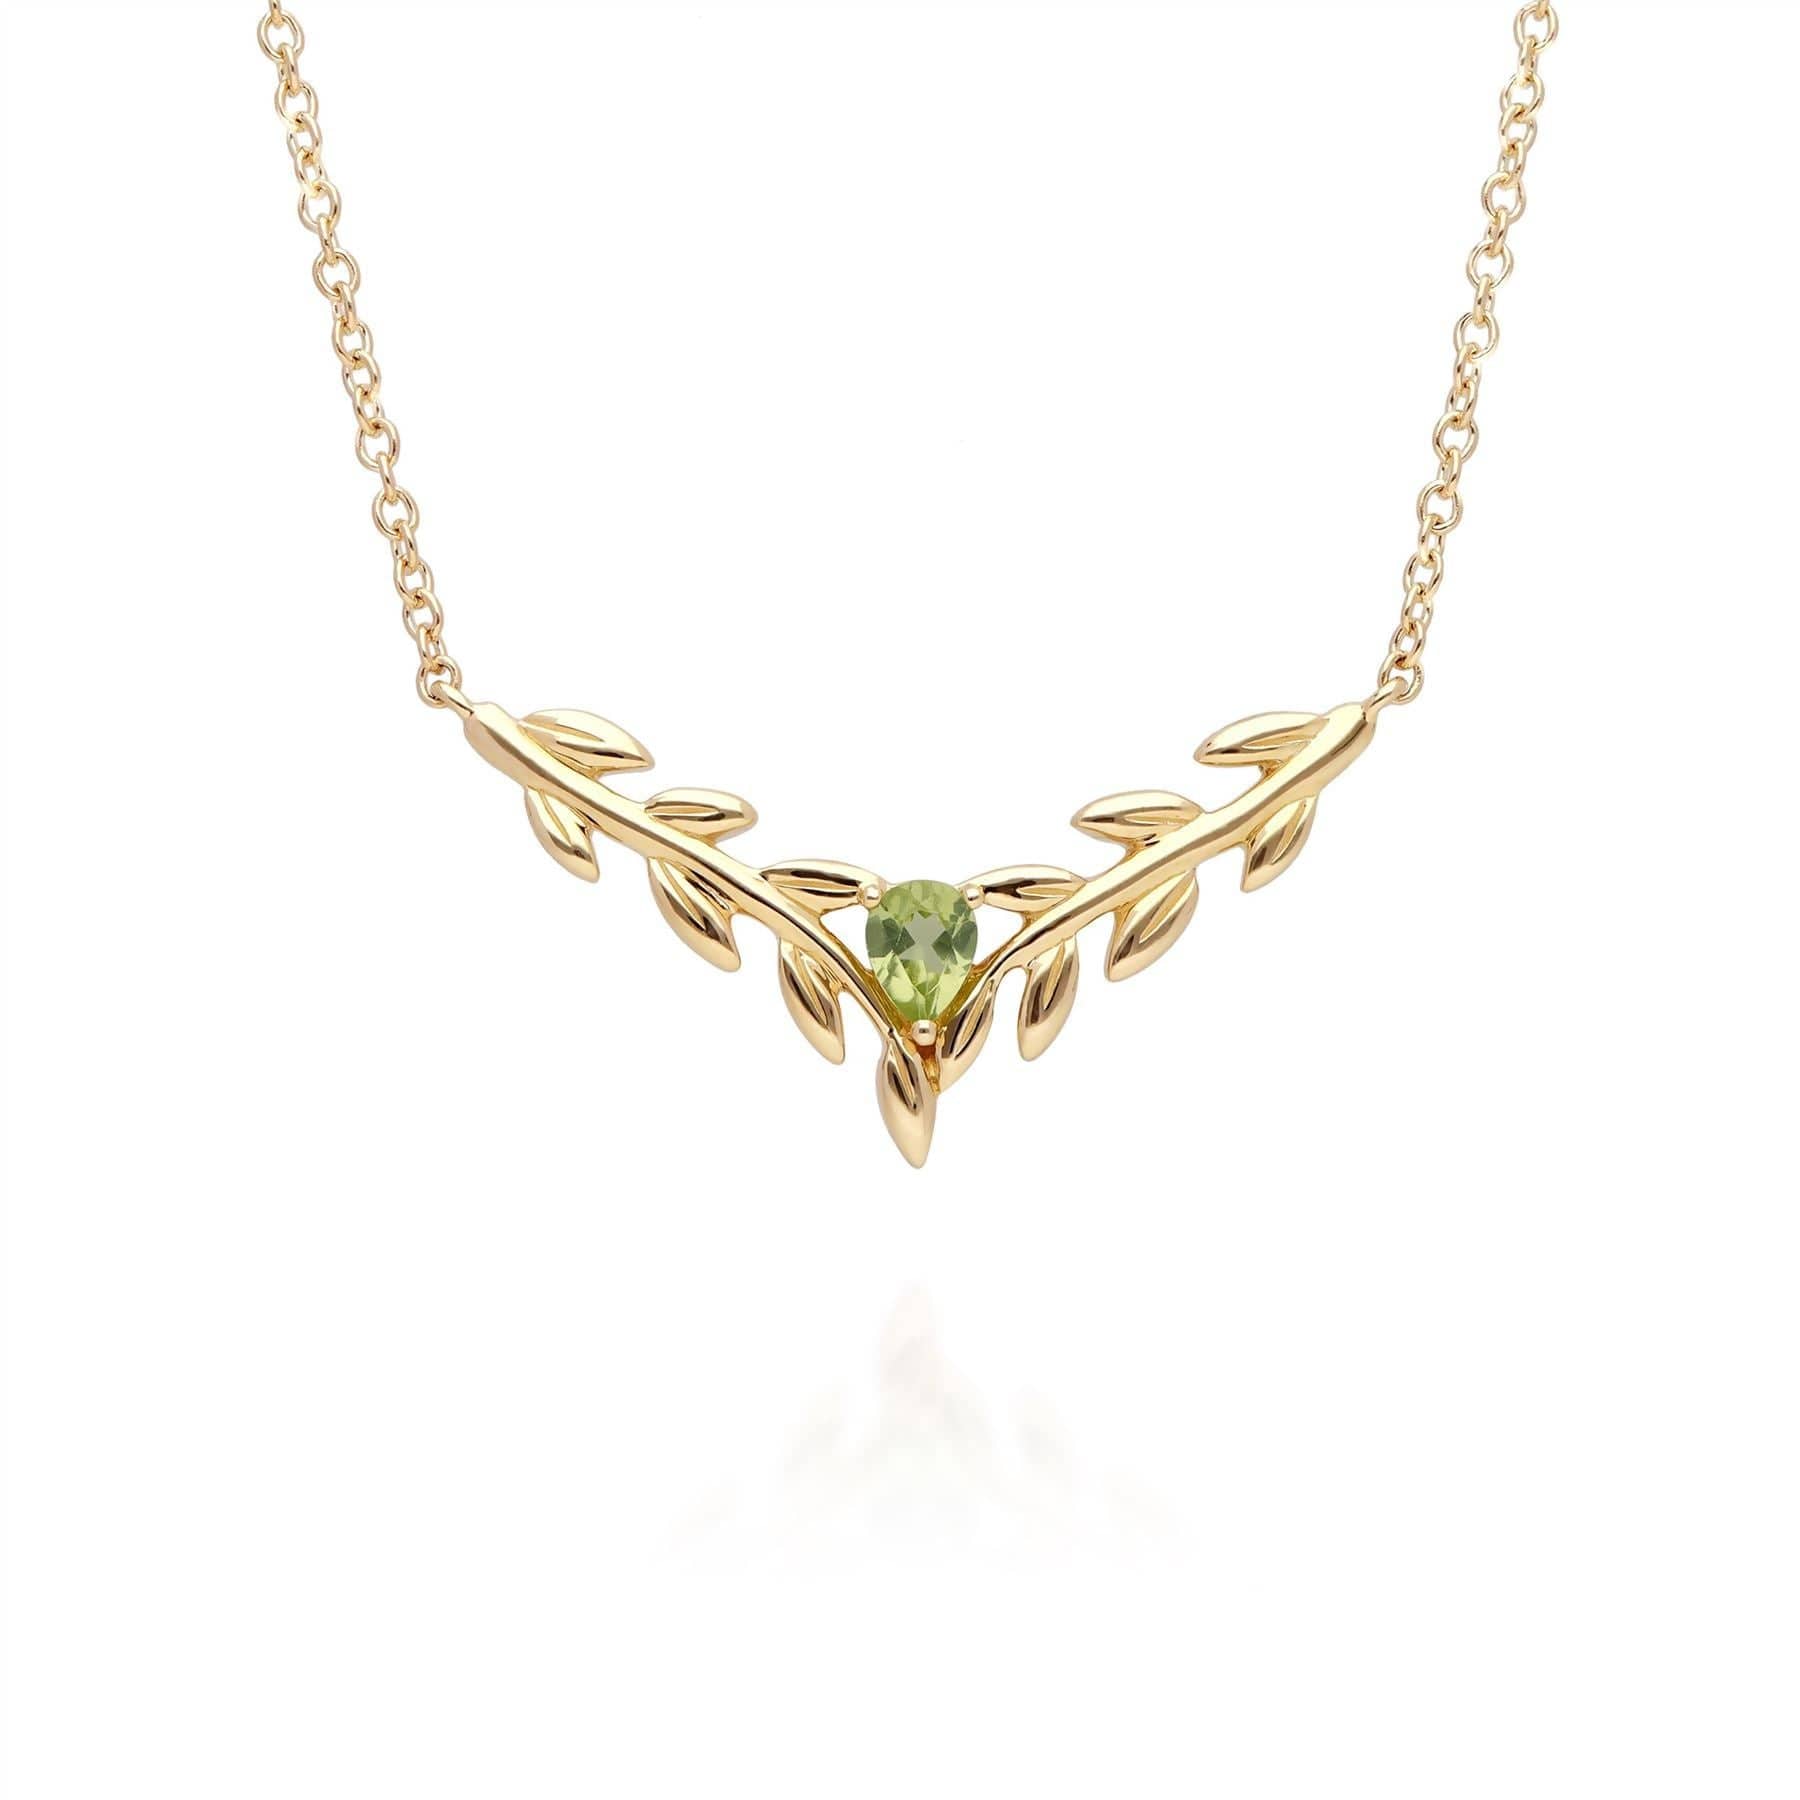 135N0366019-135R1914019 O Leaf Peridot Necklace & Ring Set in 9ct Yellow Gold 2